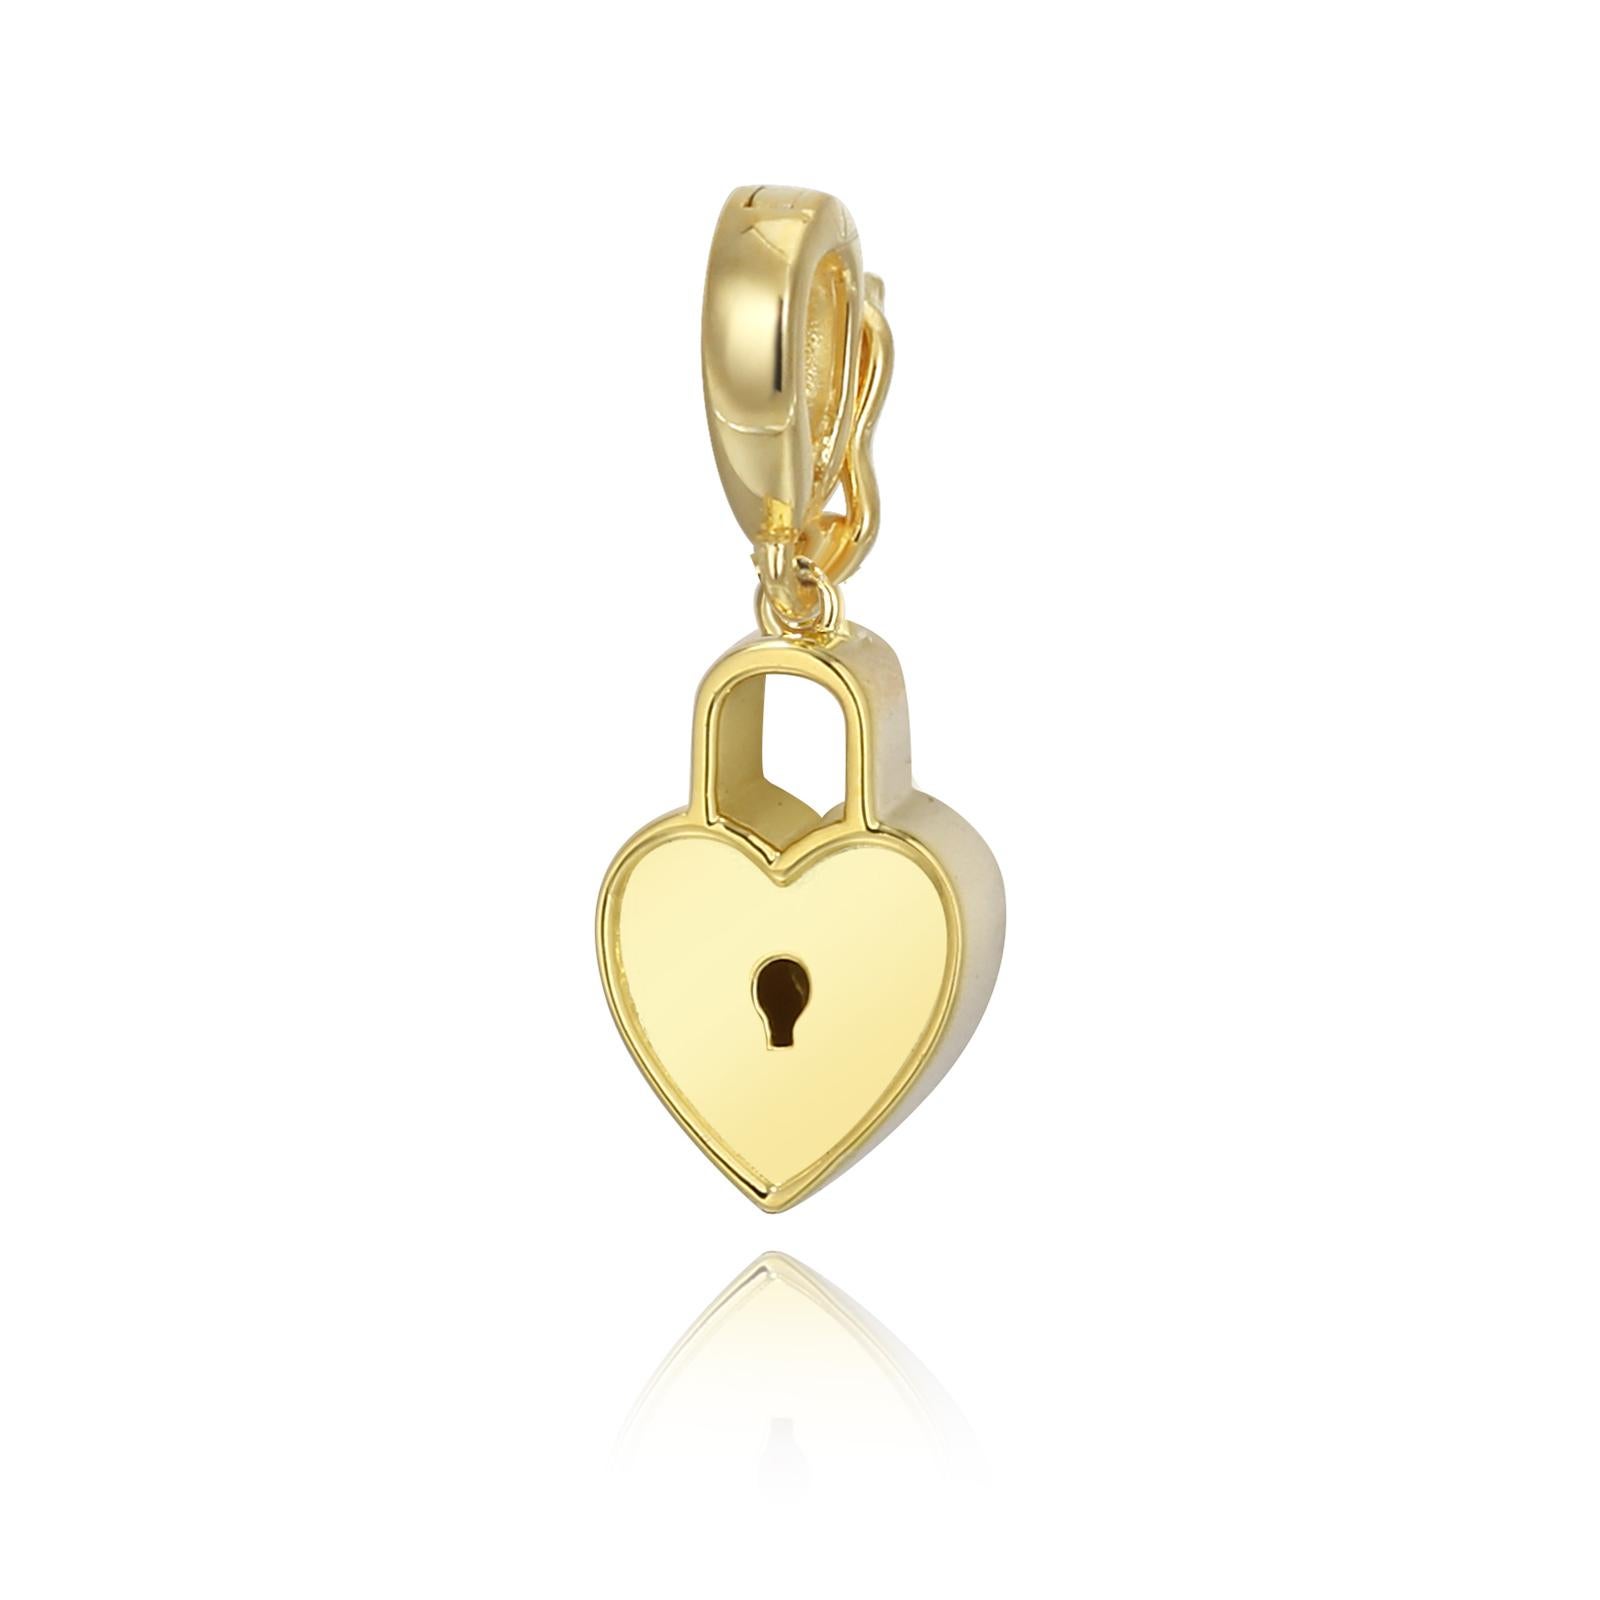 Heart Lock Pendant/Charm In New Condition For Sale In New York, NY